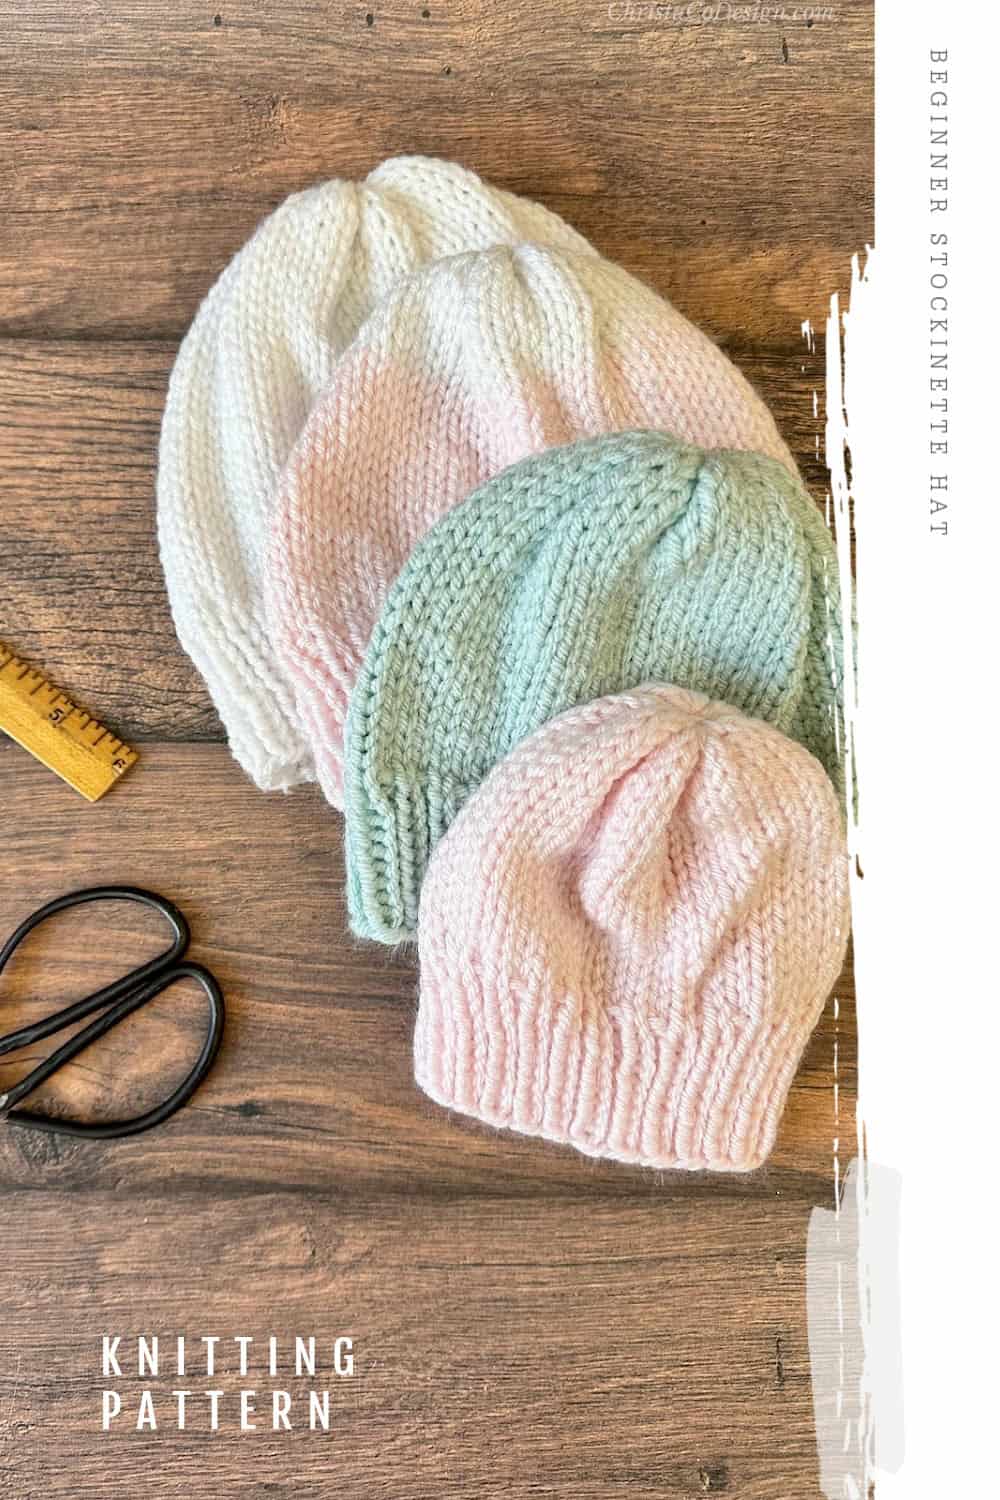 Pin image Four baby hats in white, pink and blue stacked with knitting notions.